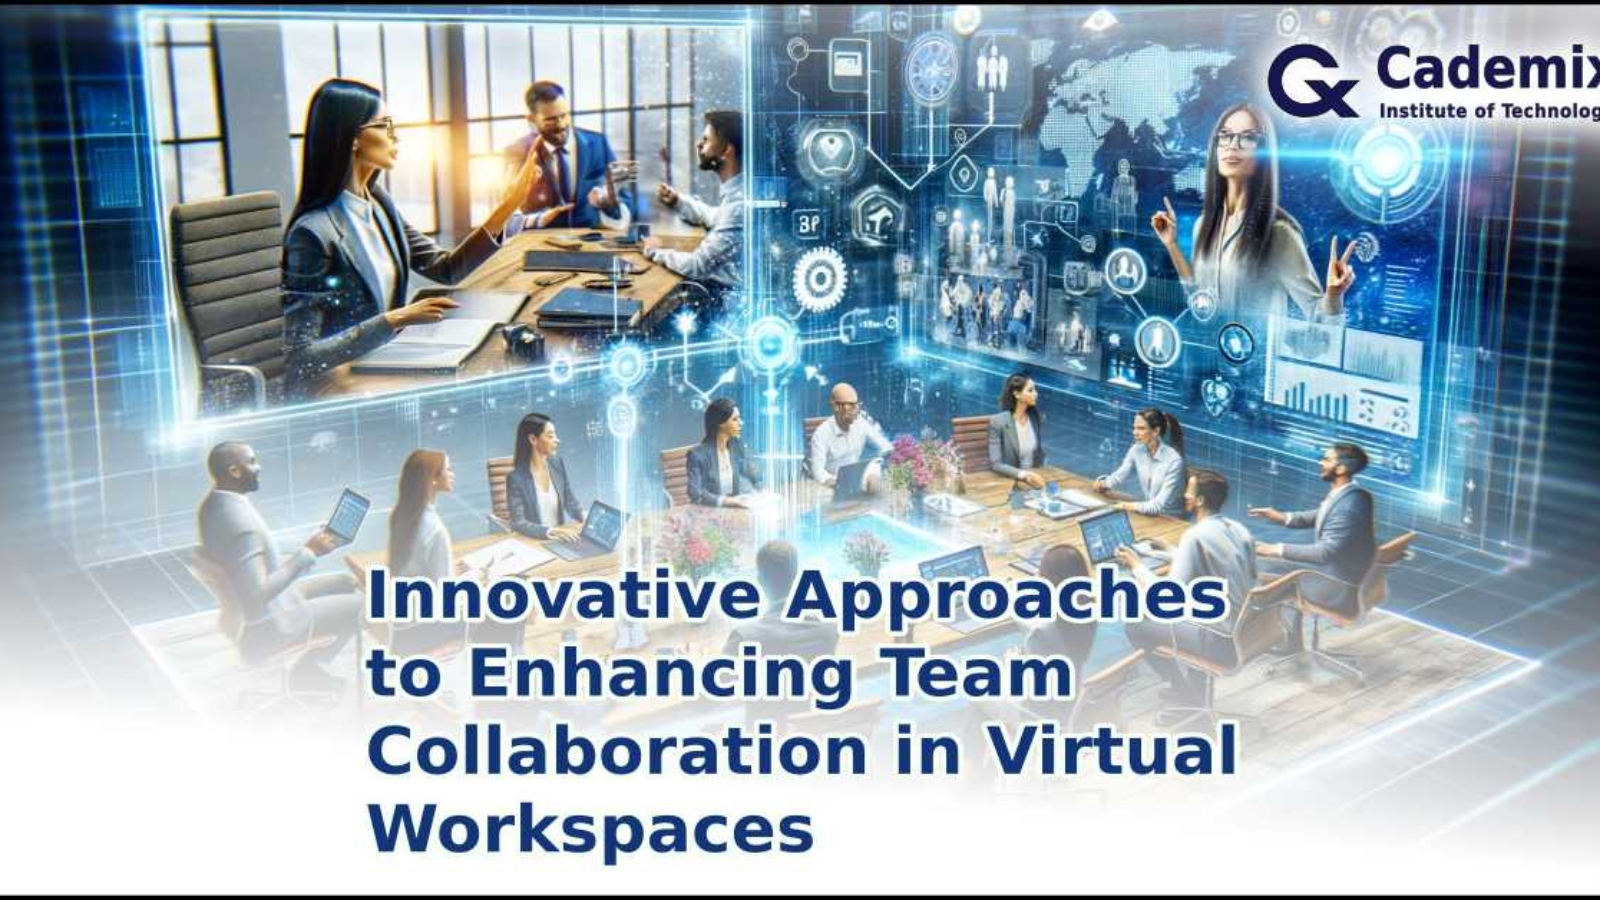 Innovative Approaches to Enhancing Team Collaboration in Virtual Workspaces